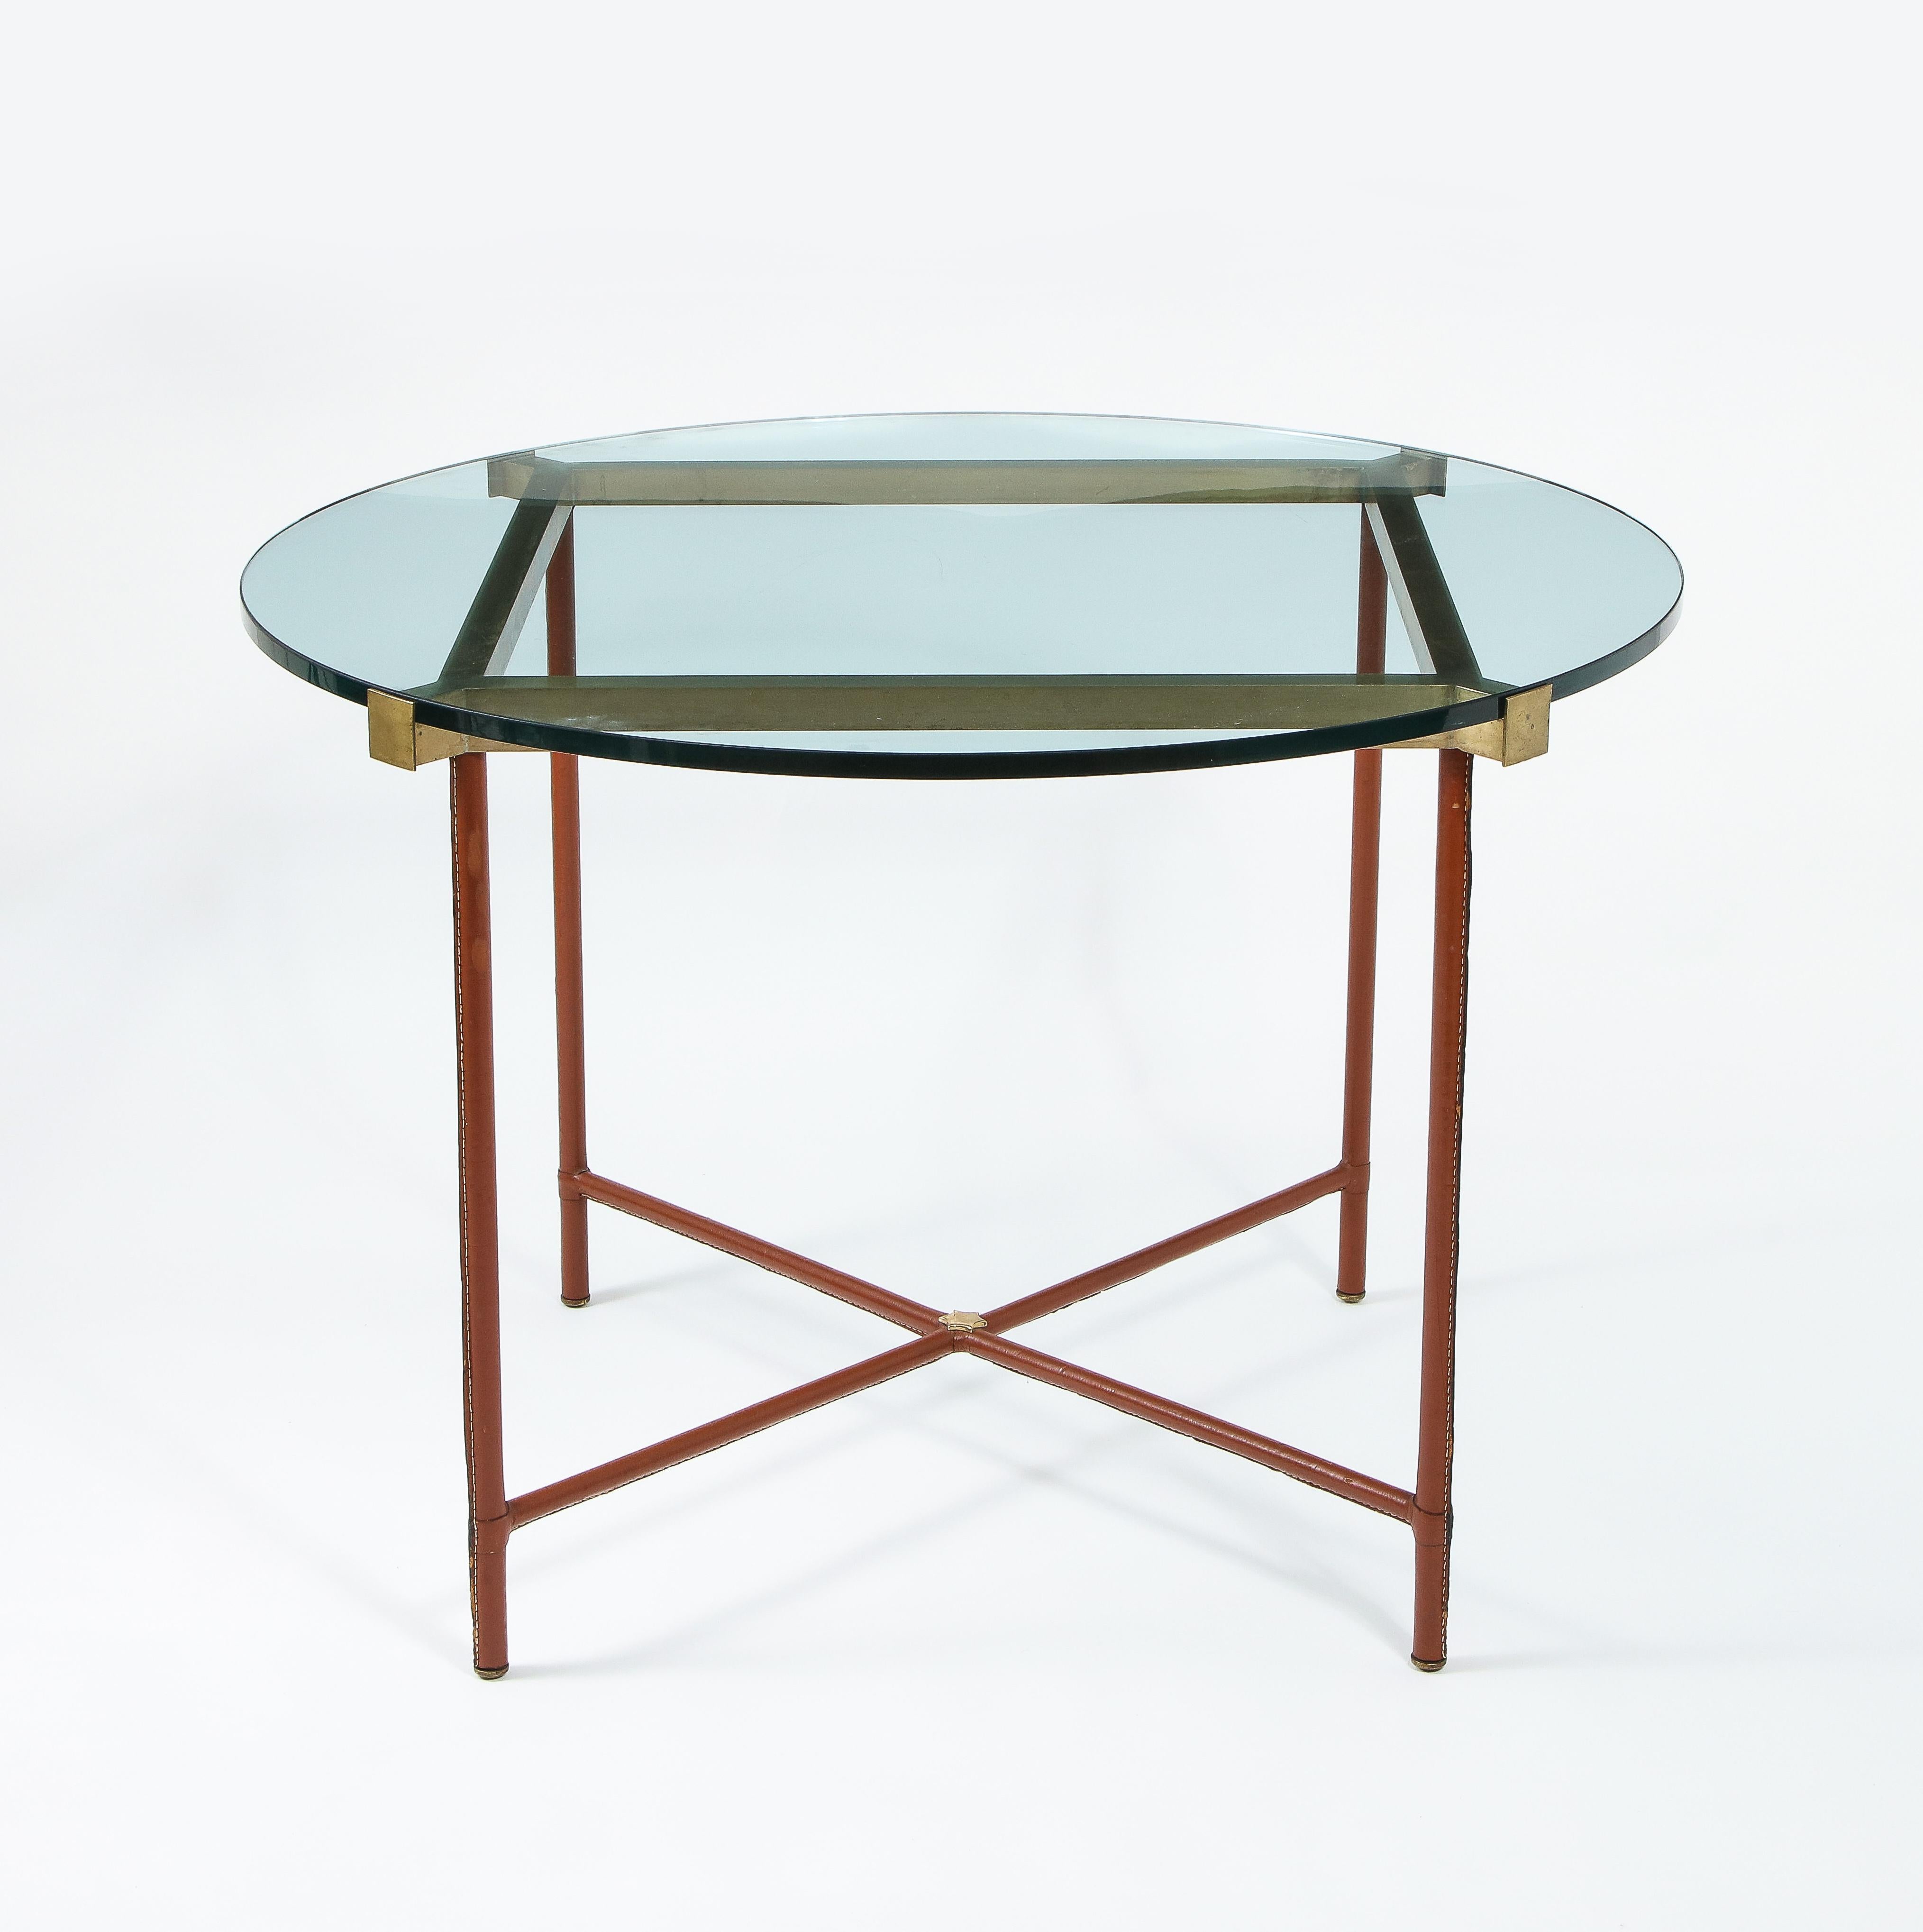 Exceptional center table by Jacques Adnet clad in tobacco brown leather, its four legs joined by an X-stretcher and a large brass frame supports the glass top, it rests on bronze feet.